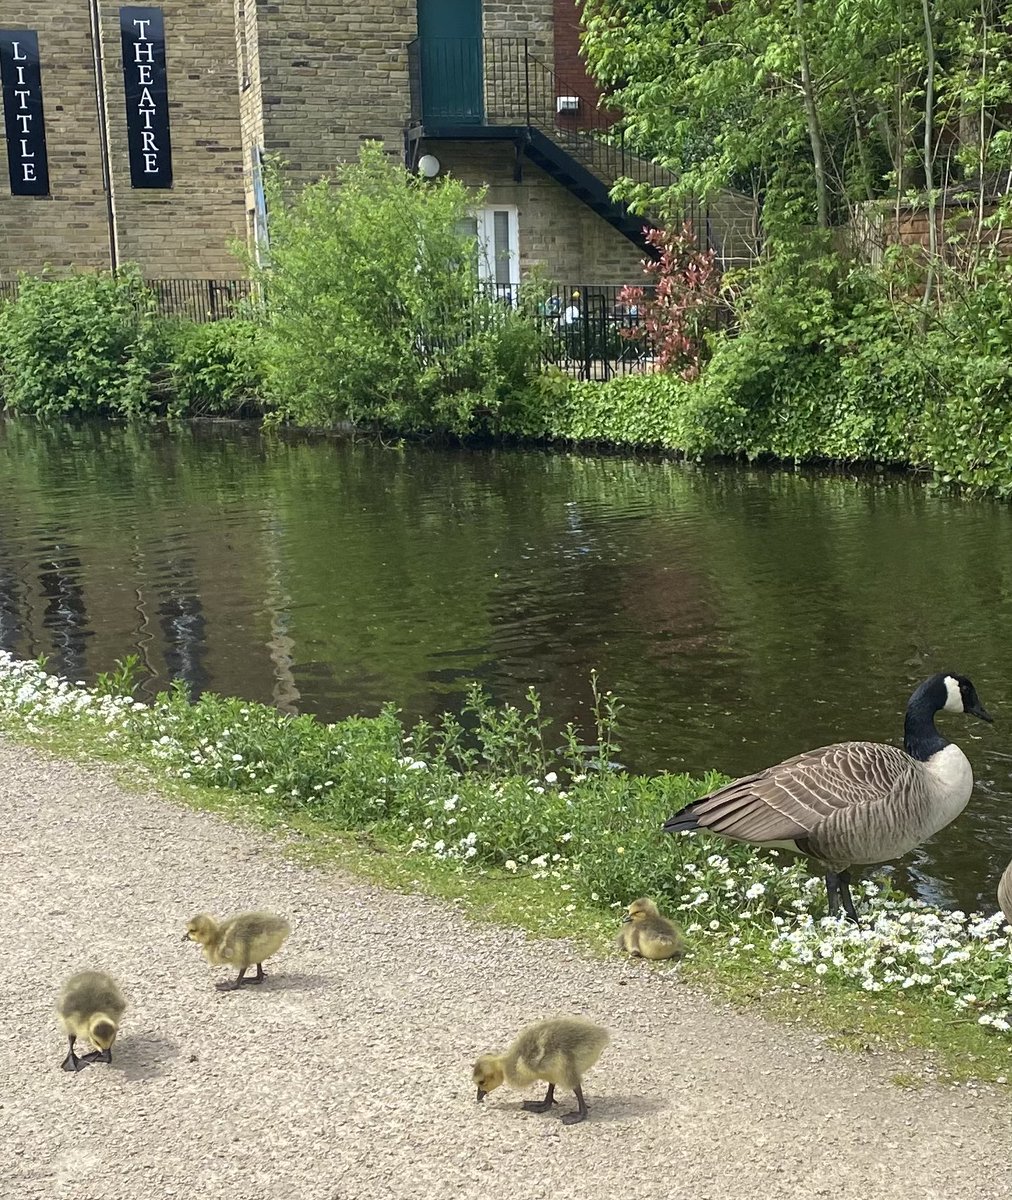 Lunchtime walk on the canal towpath today  🥰
#HebdenBridge